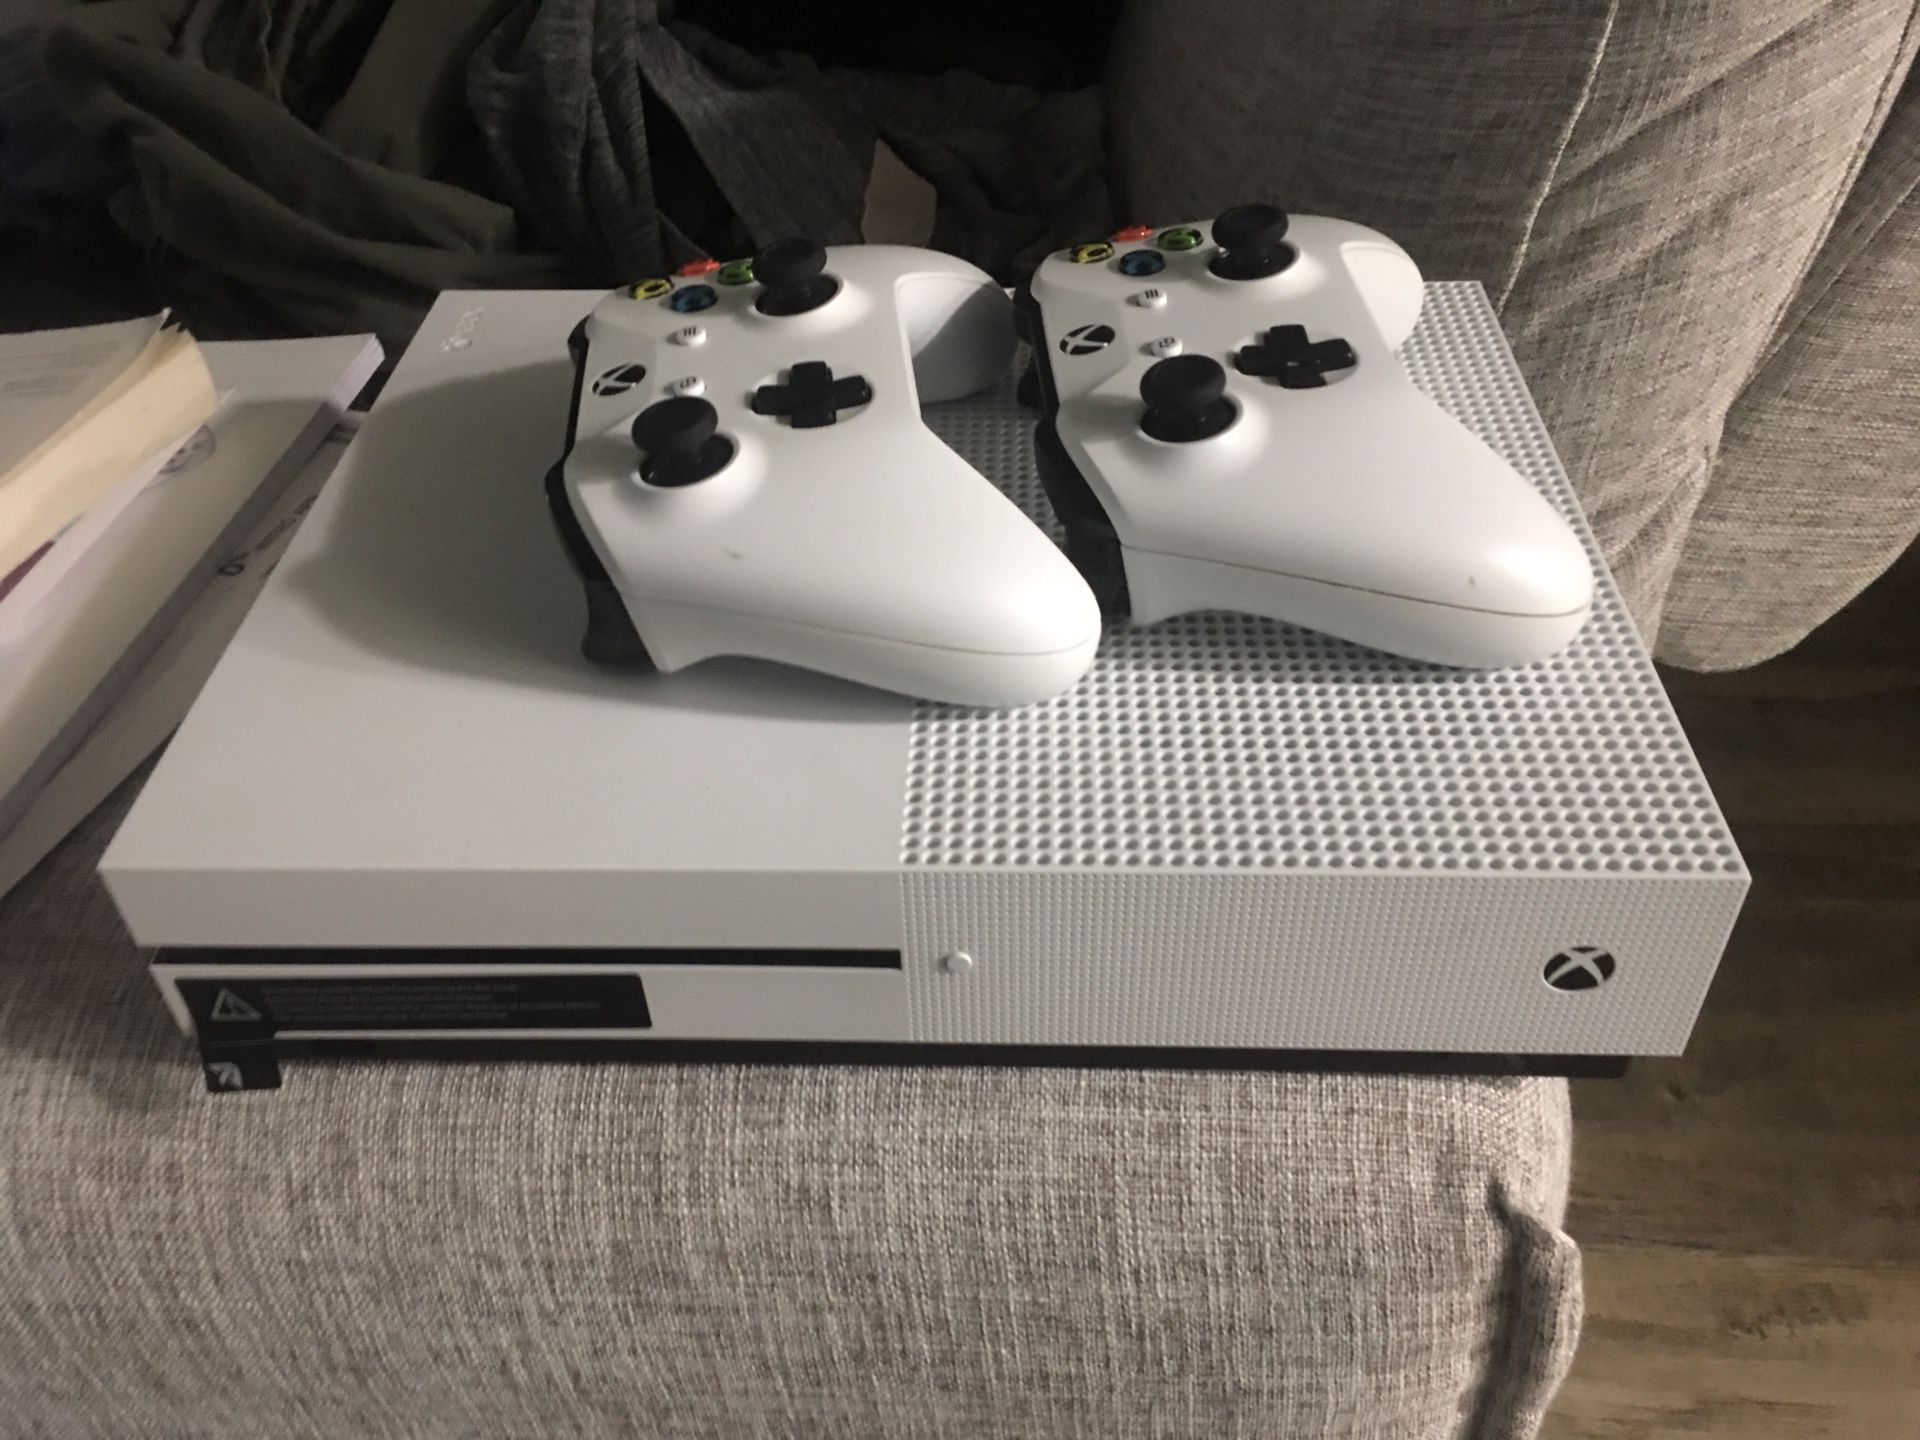 Xbox one s: 2 Remote Controls, headset and battery pack charger